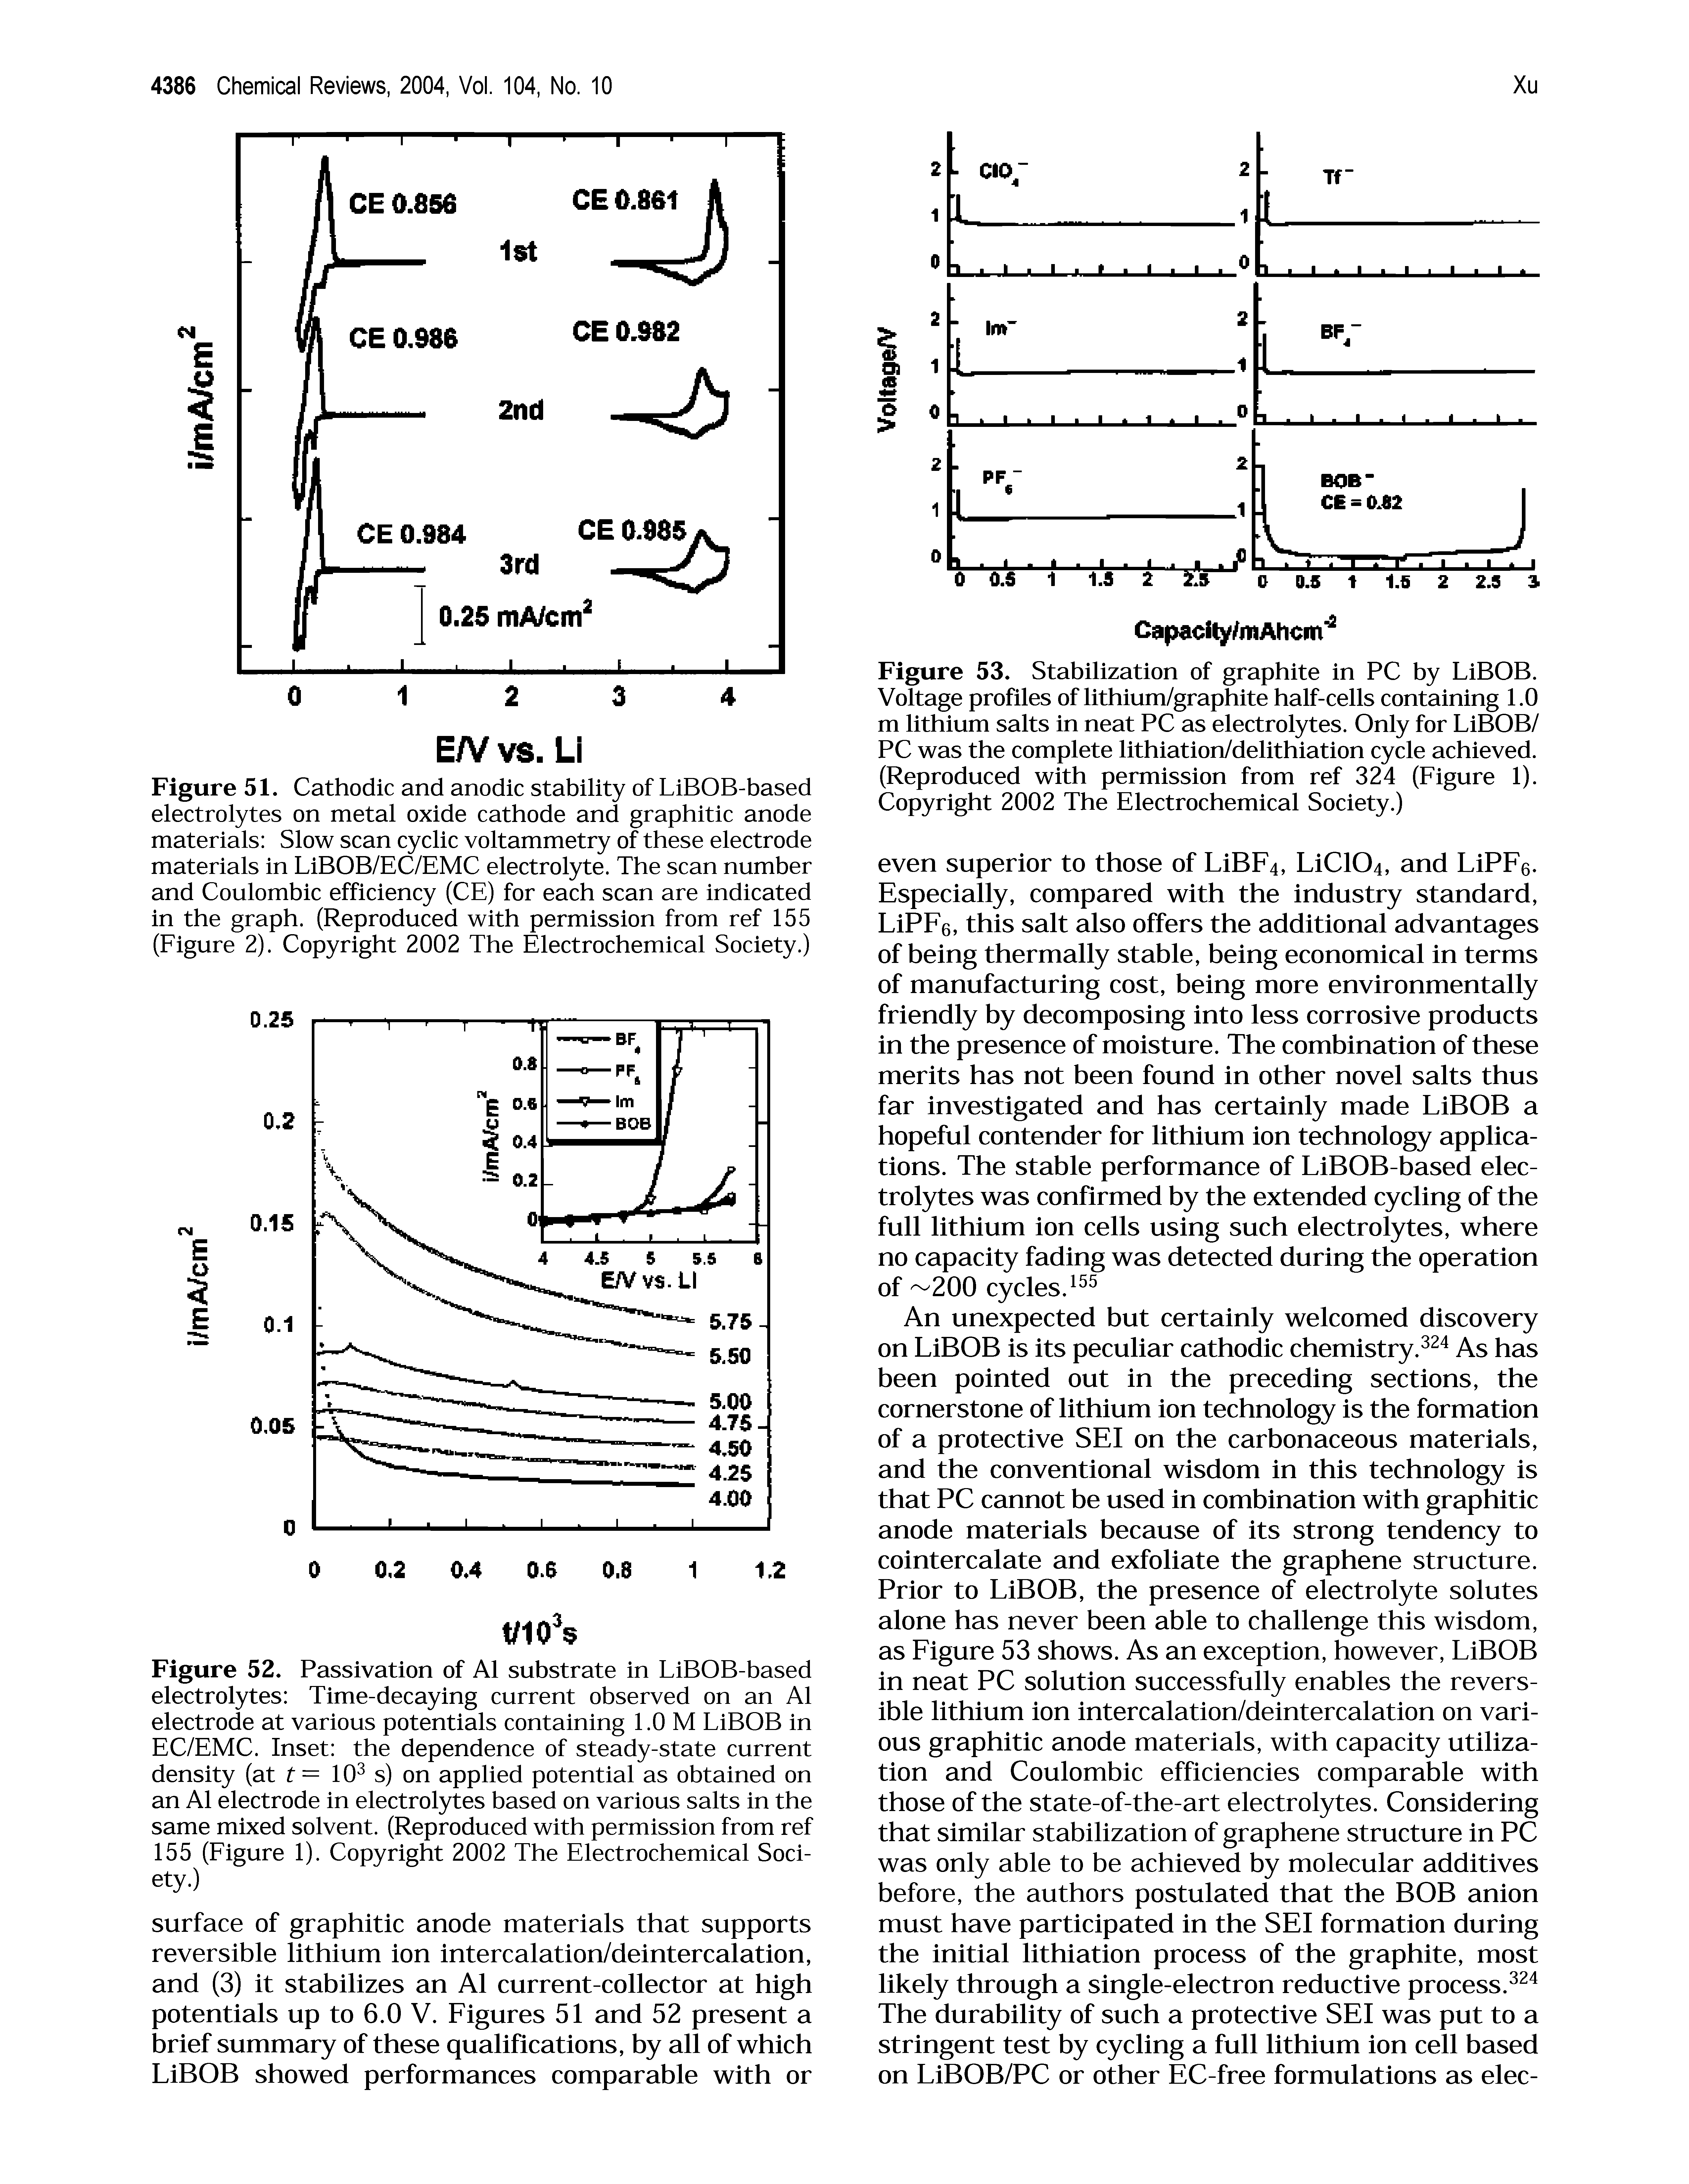 Figure 51. Cathodic and anodic stability of LiBOB-based electrolytes on metal oxide cathode and graphitic anode materials Slow scan cyclic voltammetry of these electrode materials in LiBOB/EC/EMC electrolyte. The scan number and Coulombic efficiency (CE) for each scan are indicated in the graph. (Reproduced with permission from ref 155 (Eigure 2). Copyright 2002 The Electrochemical Society.)...